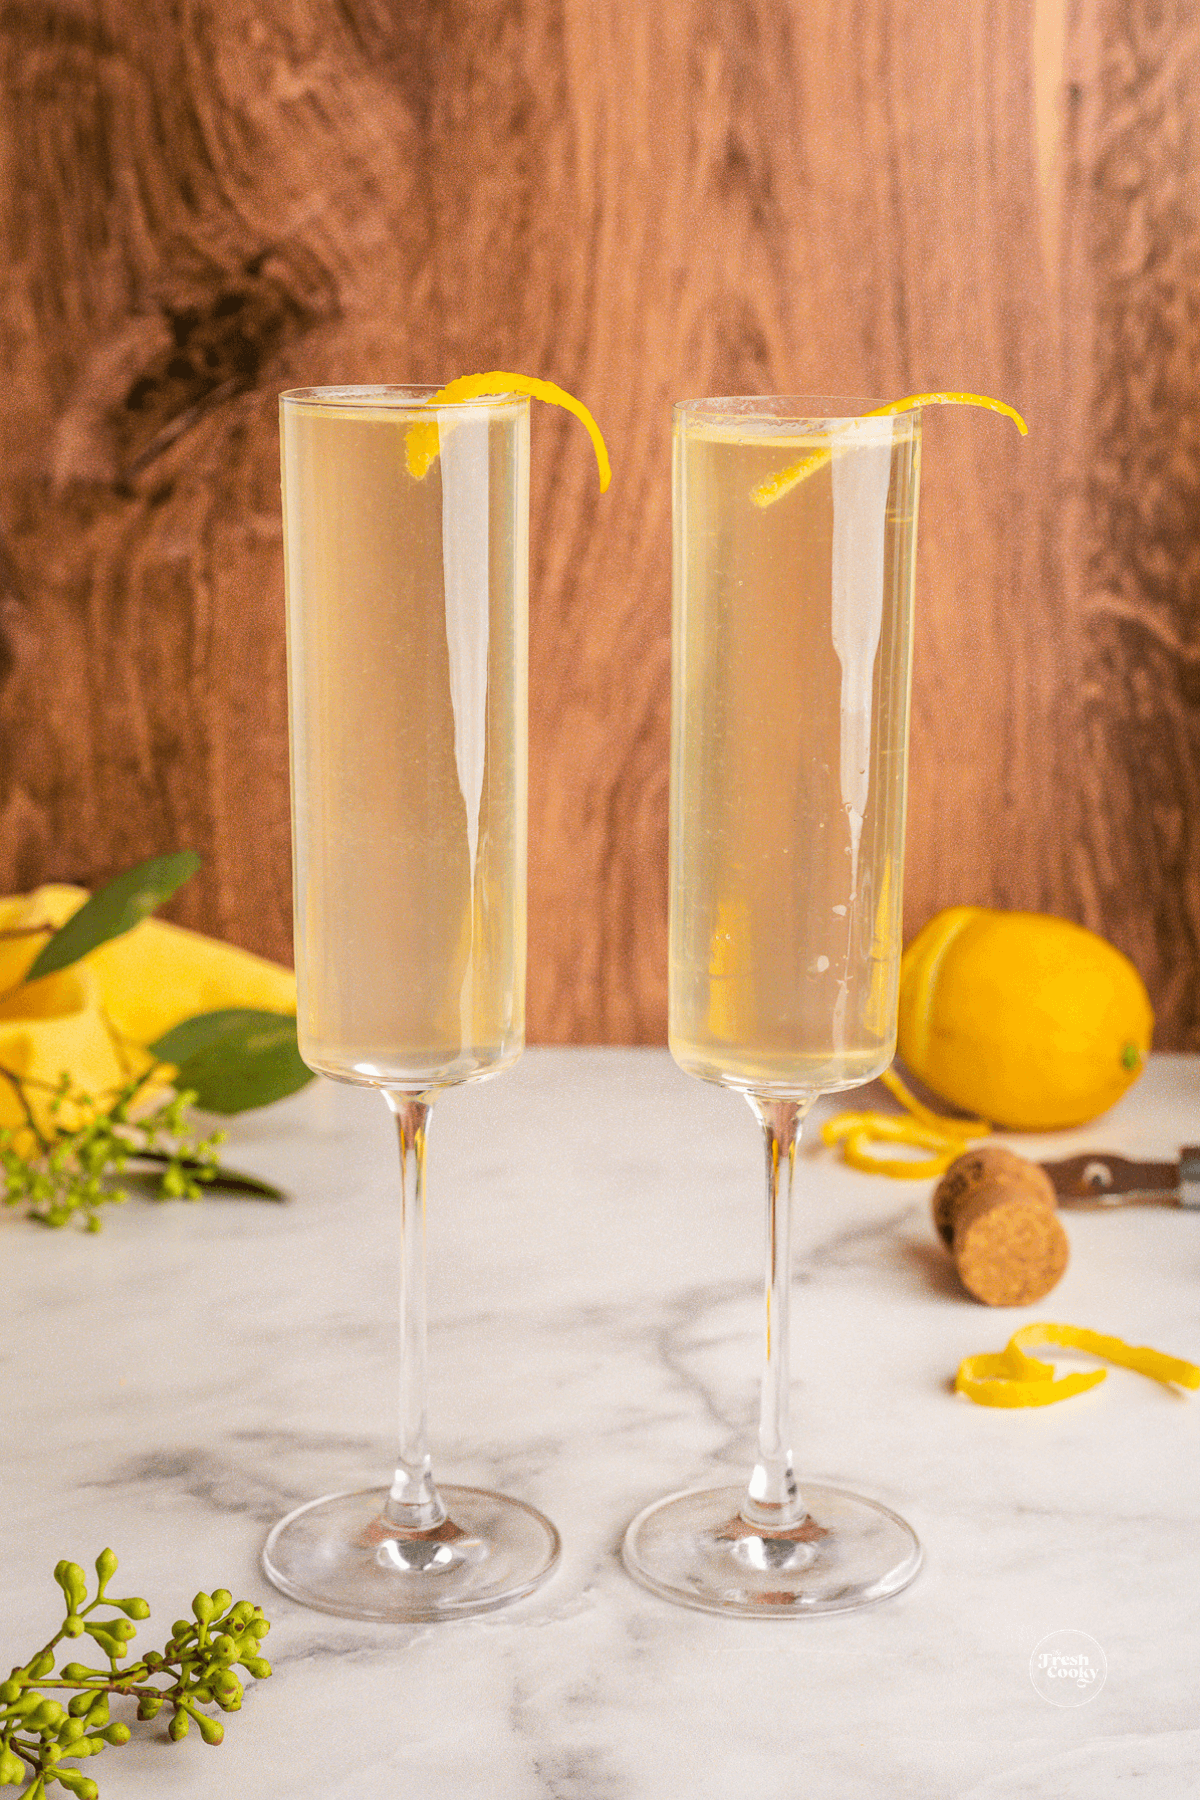 Two glasses of French 75 elderflower cocktail, with lemon twist.